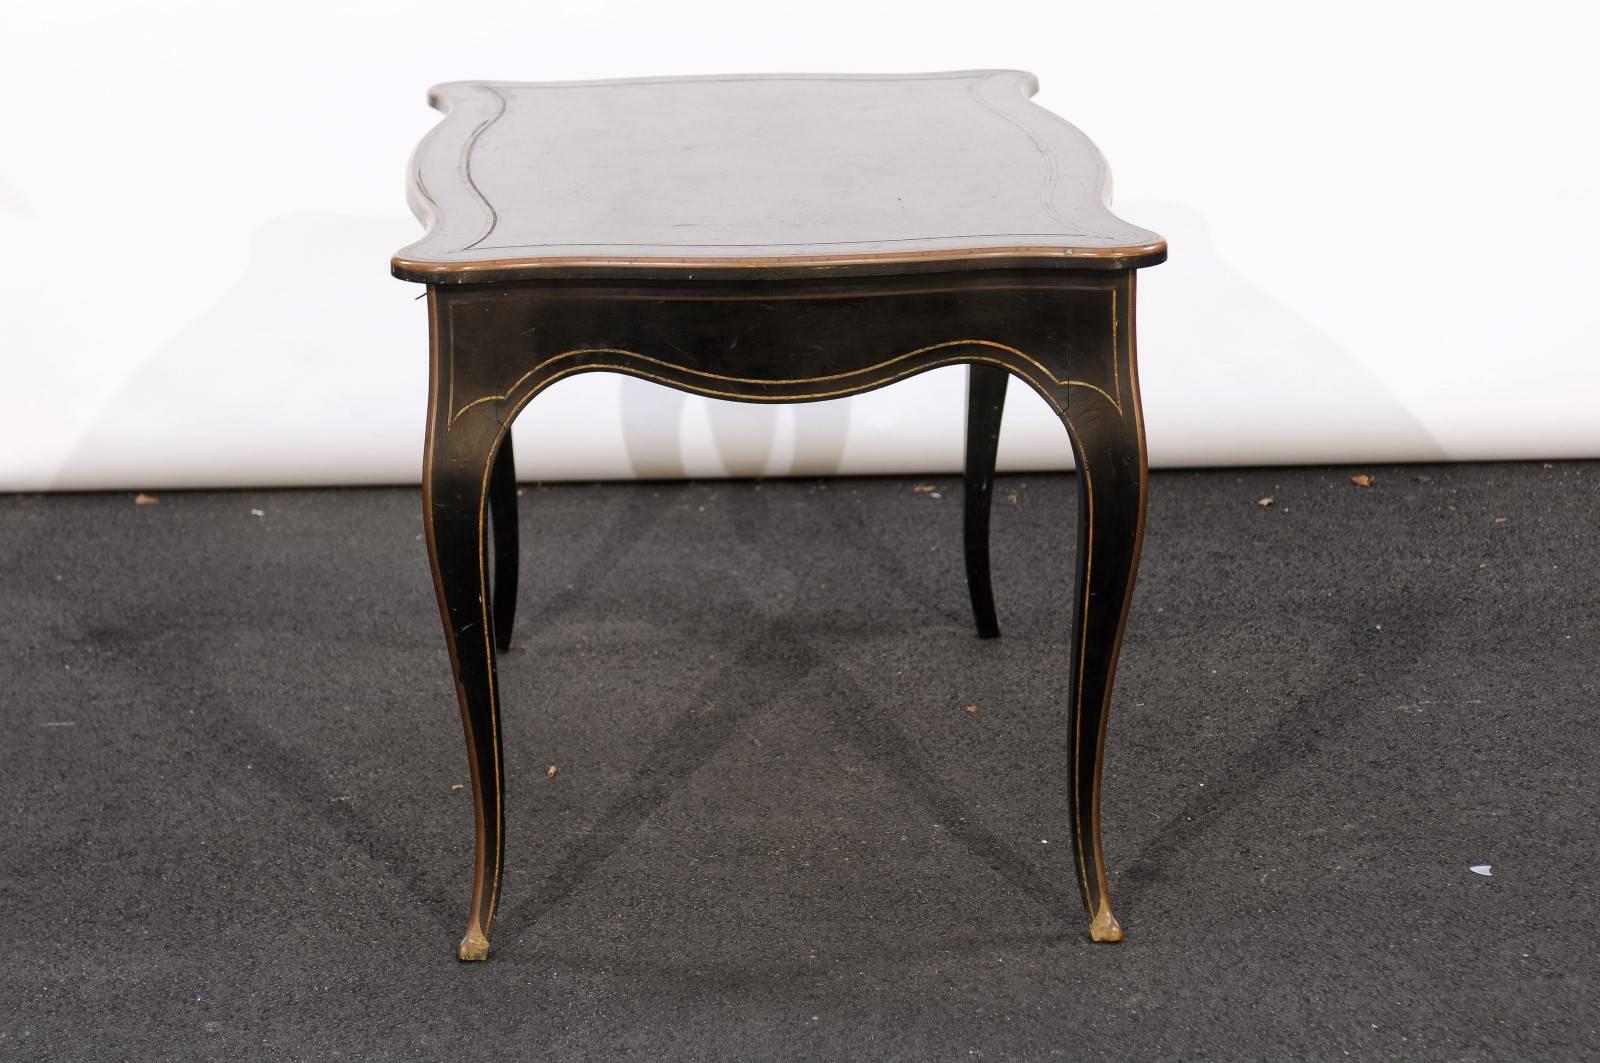 French Napoleon III Style Writing Table with Gilded Accents and Cabriole Legs For Sale 3